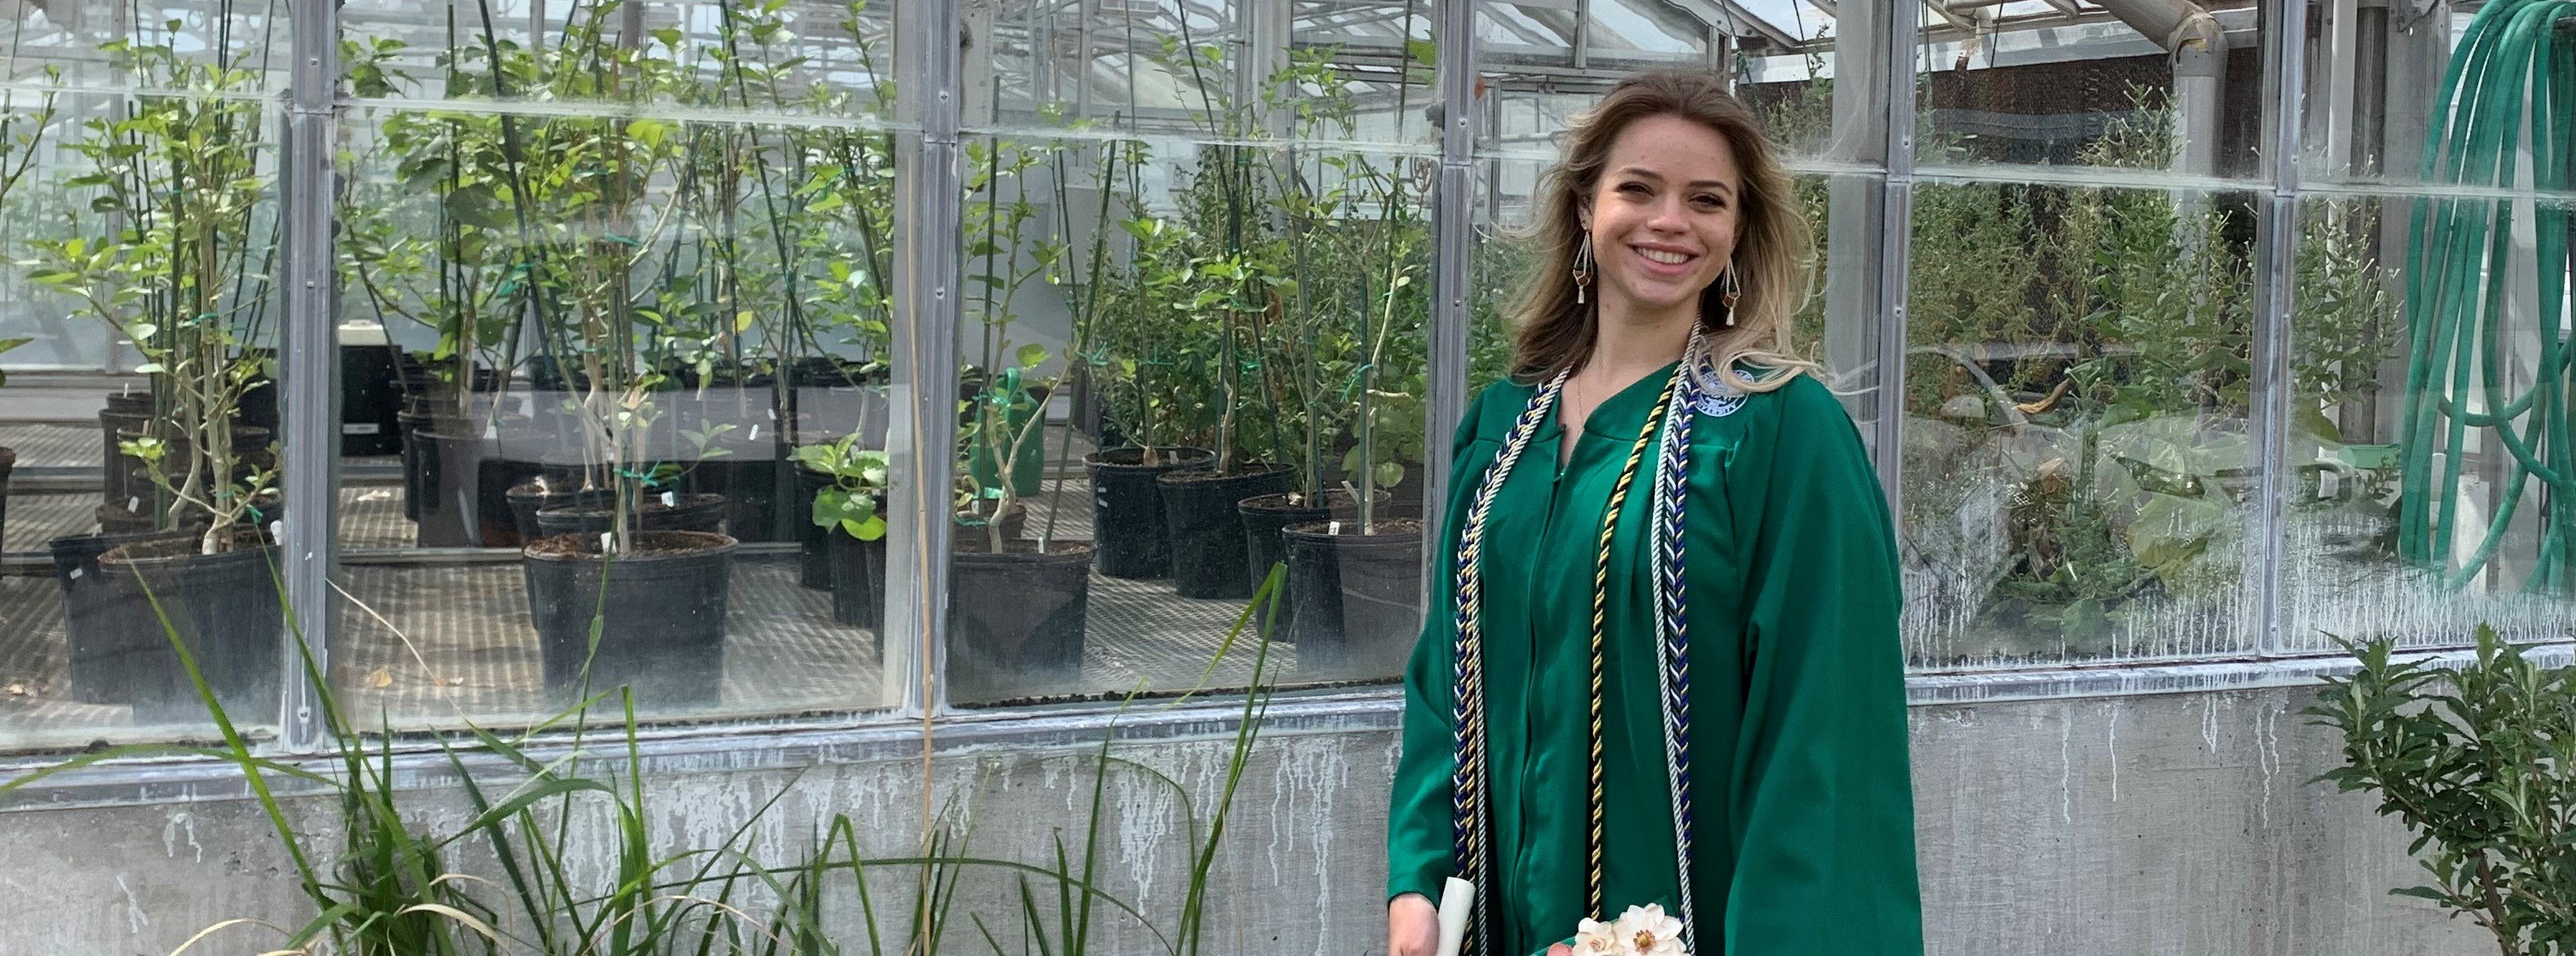 Kaylie Barton in her graduation gown outside of a greenhouse